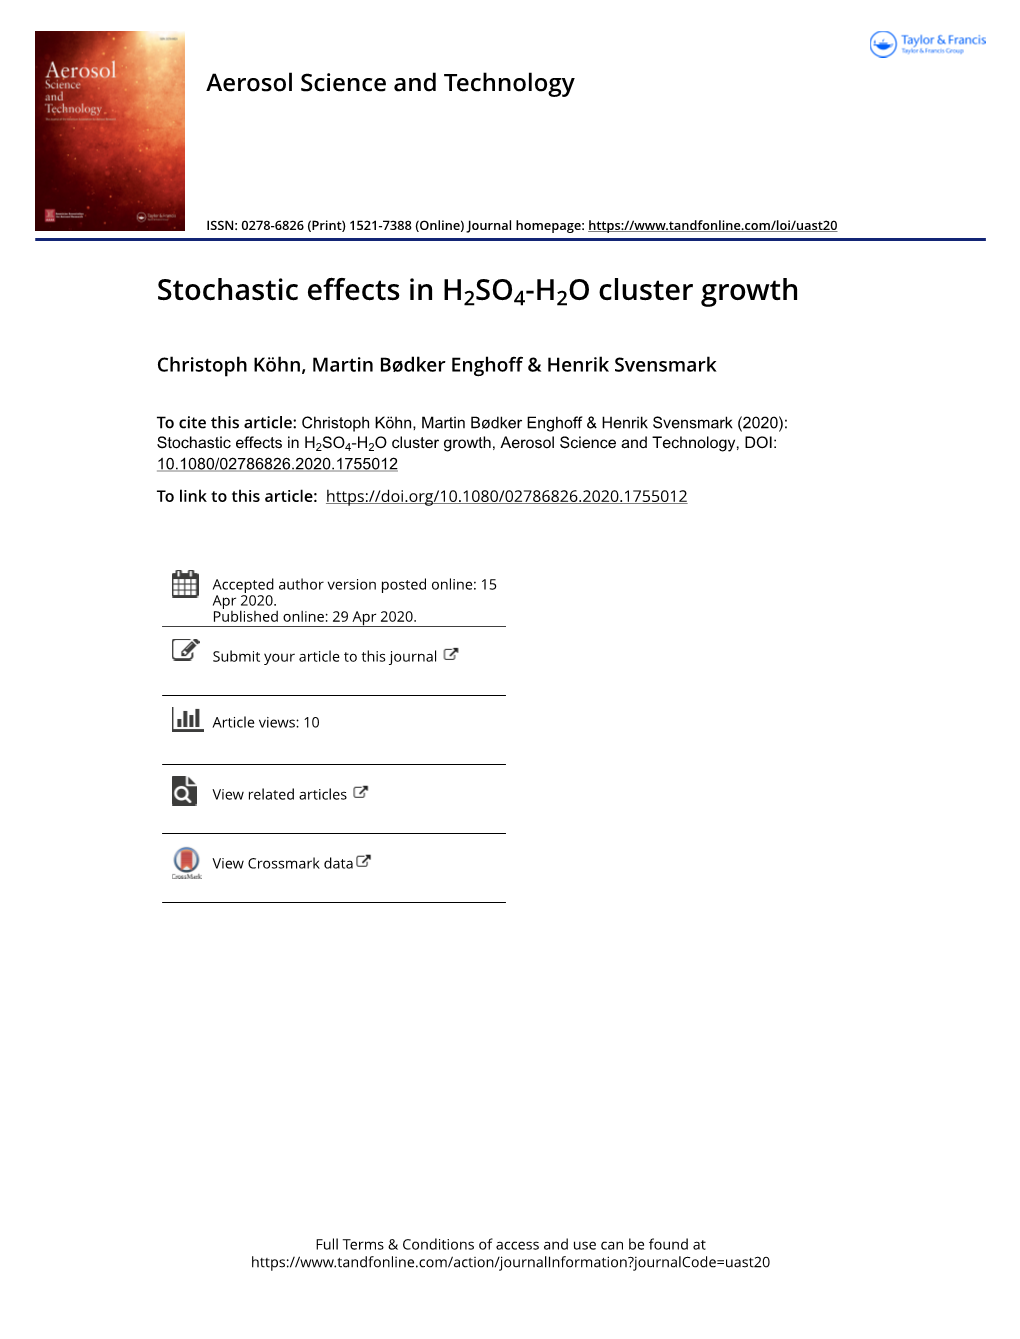 Stochastic Effects in H2SO4-H2O Cluster Growth